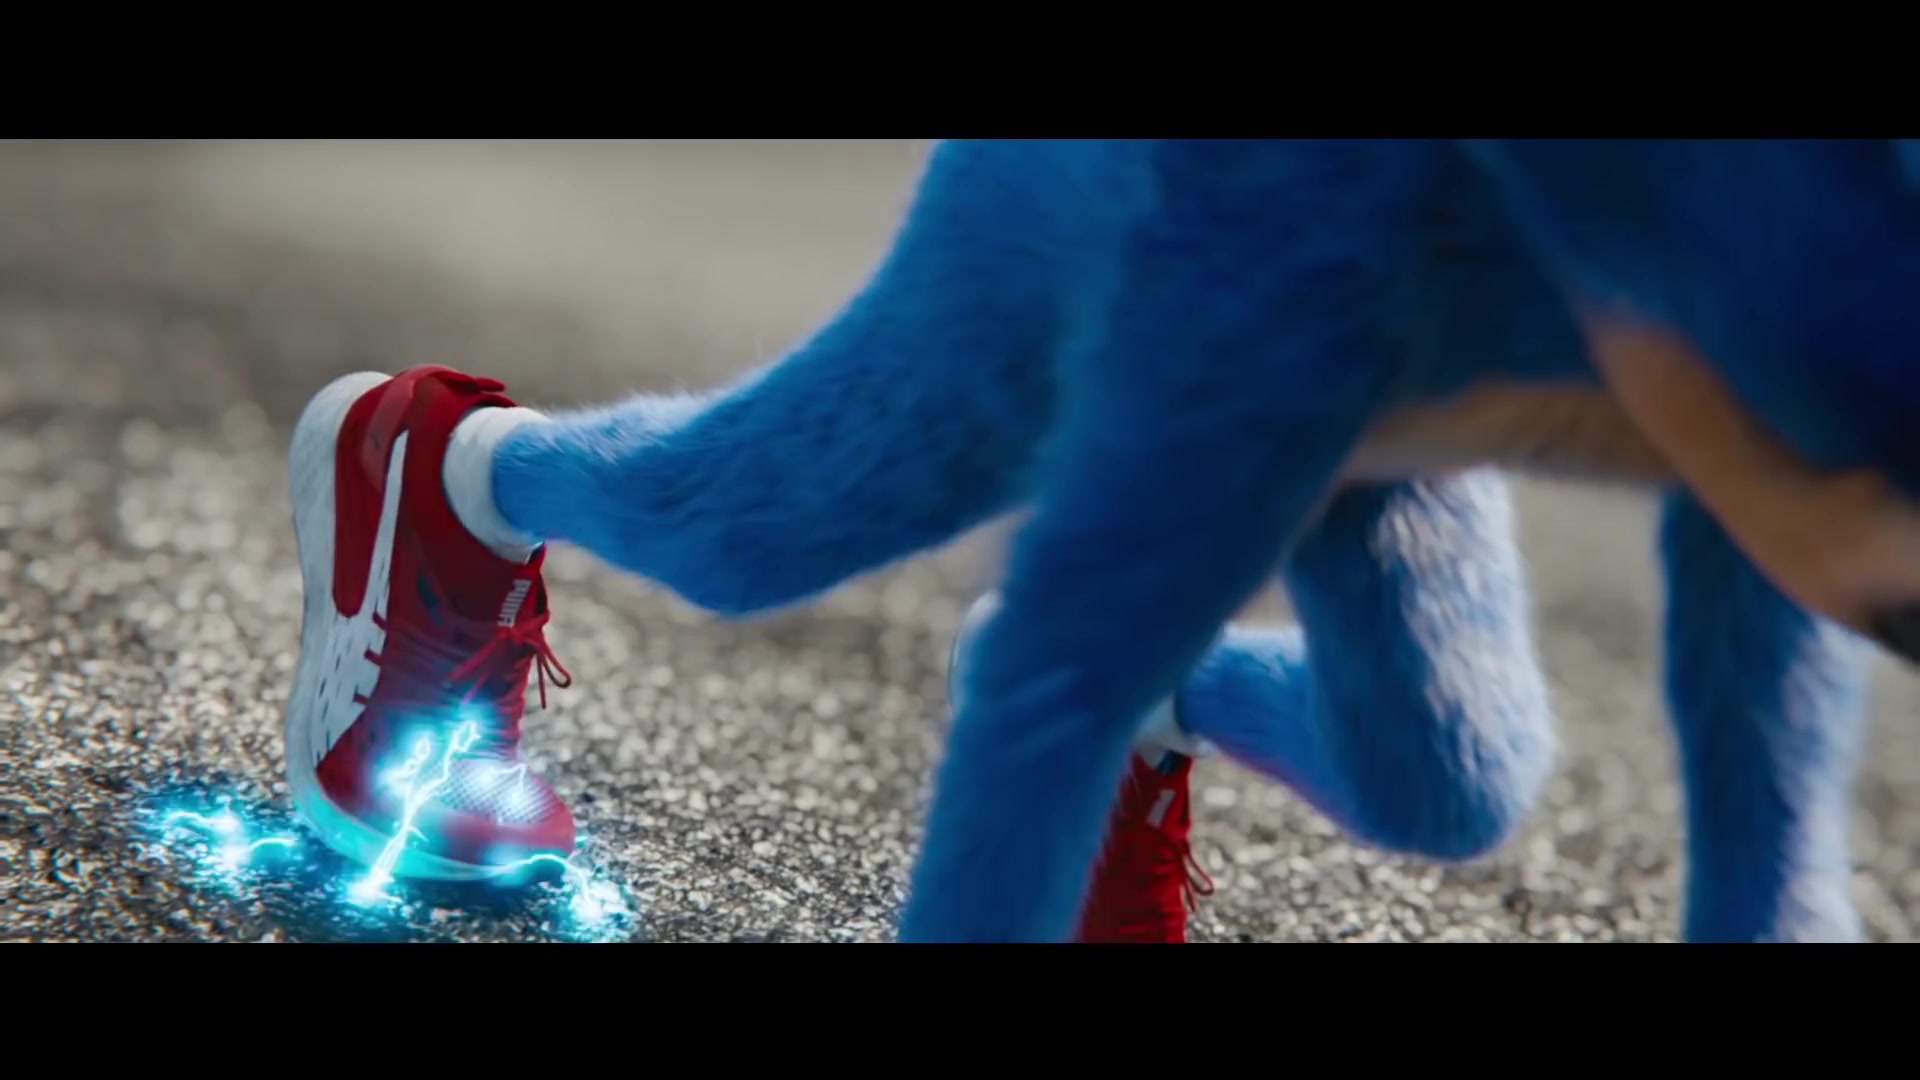 Puma Sneakers (Red) Worn by Sonic in Sonic the Hedgehog (Trailer) (2020) Movie